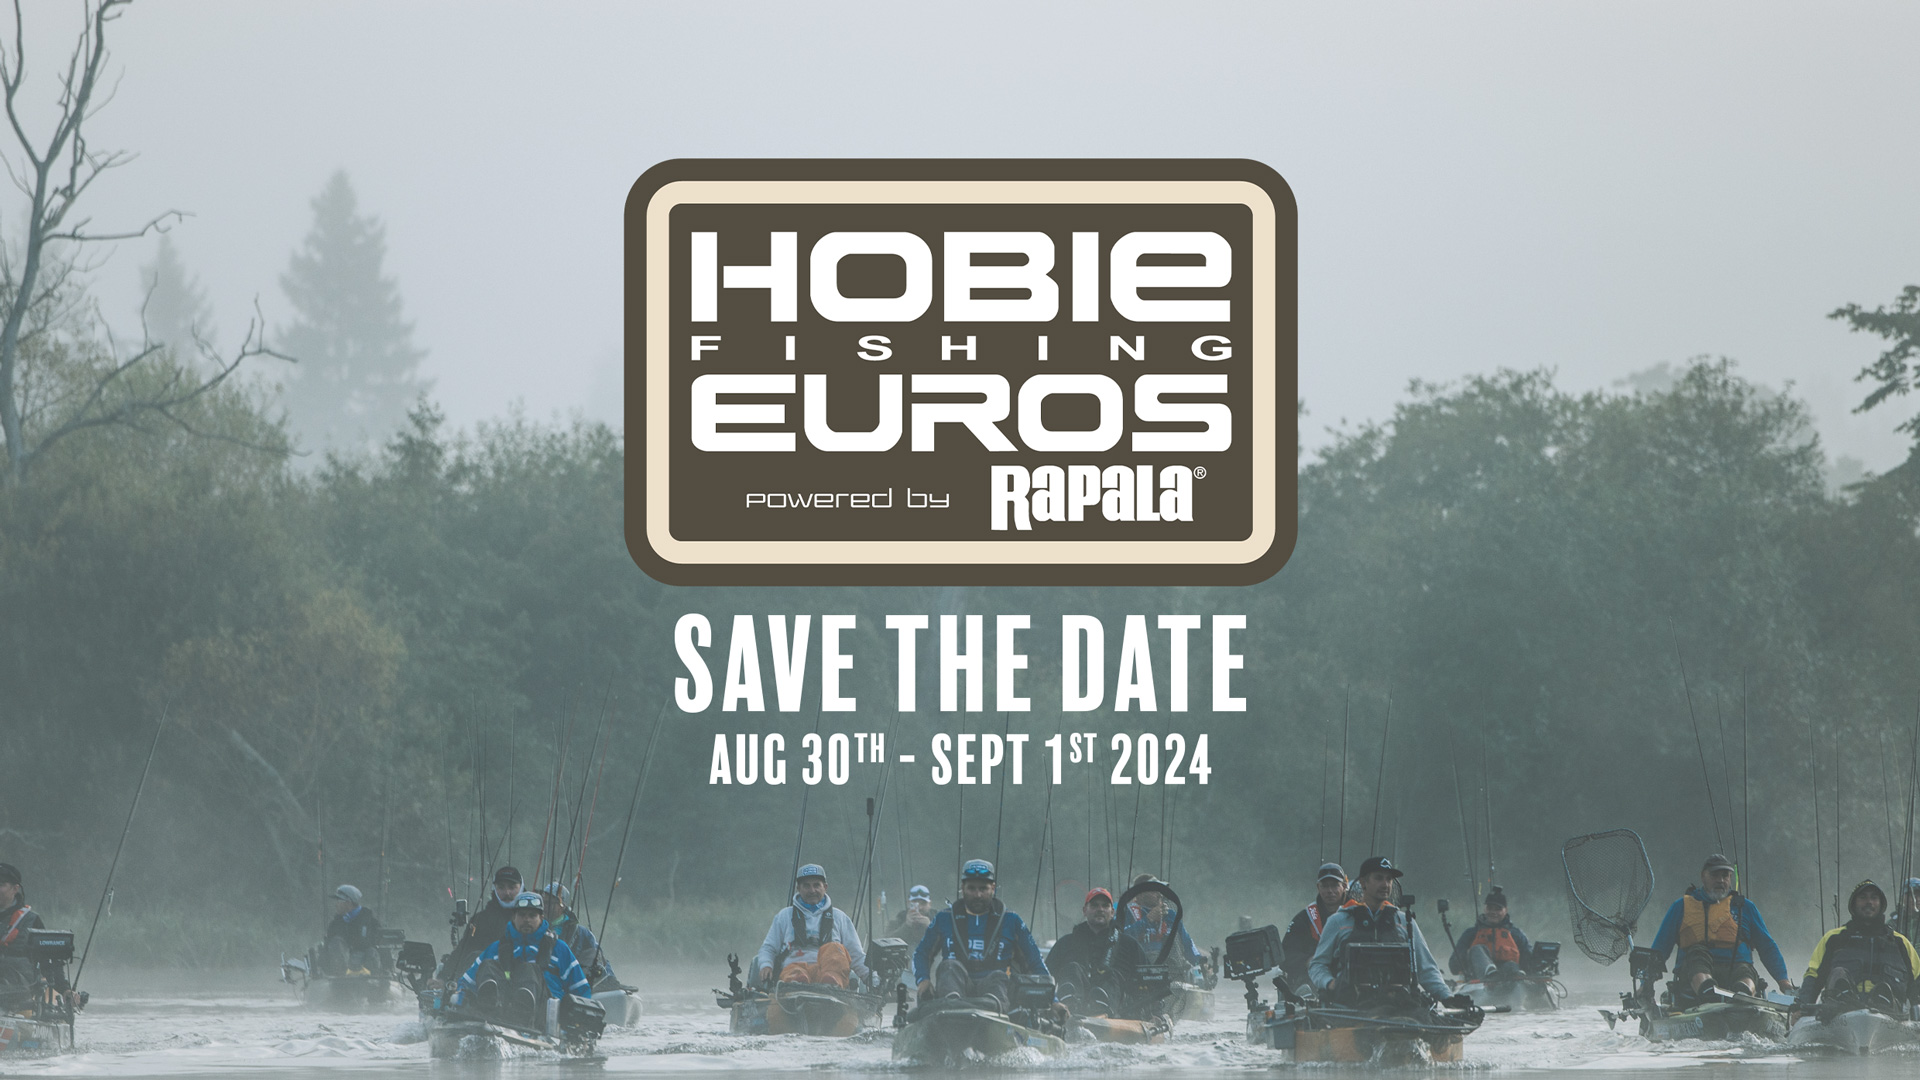 Hobie Fishing Euros - Save the date announcement